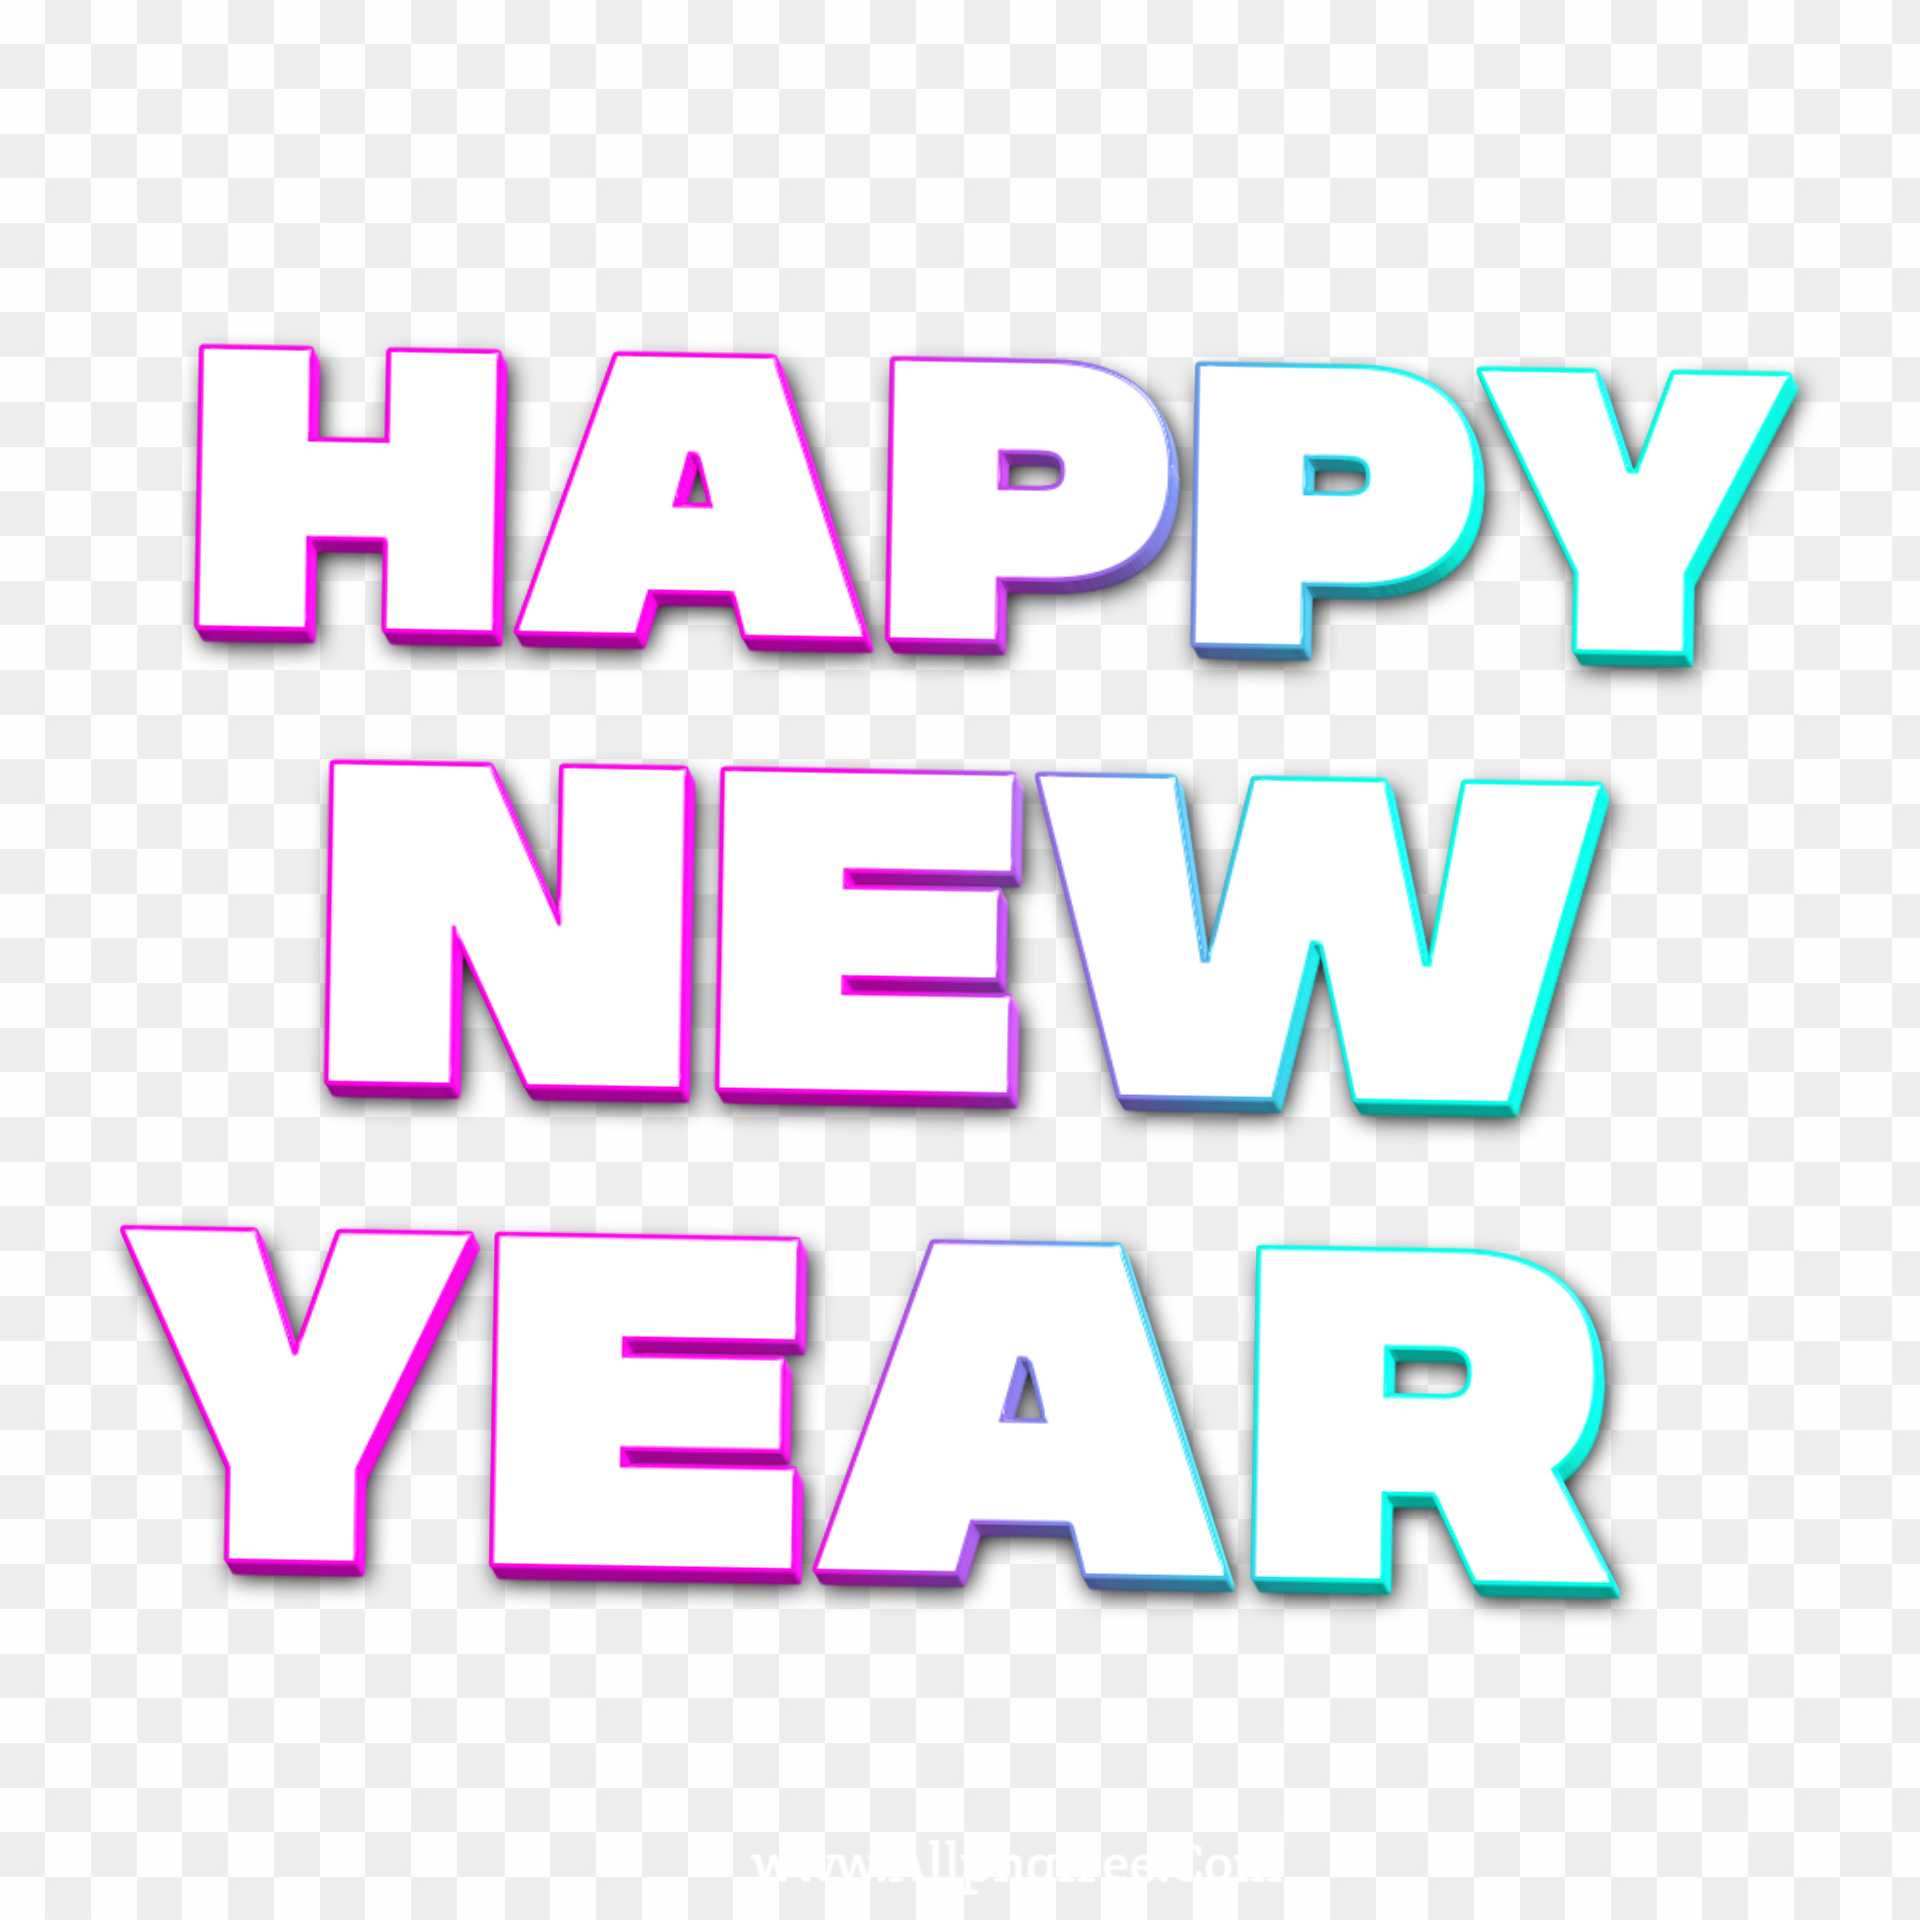 Download happy new year png transparent image free